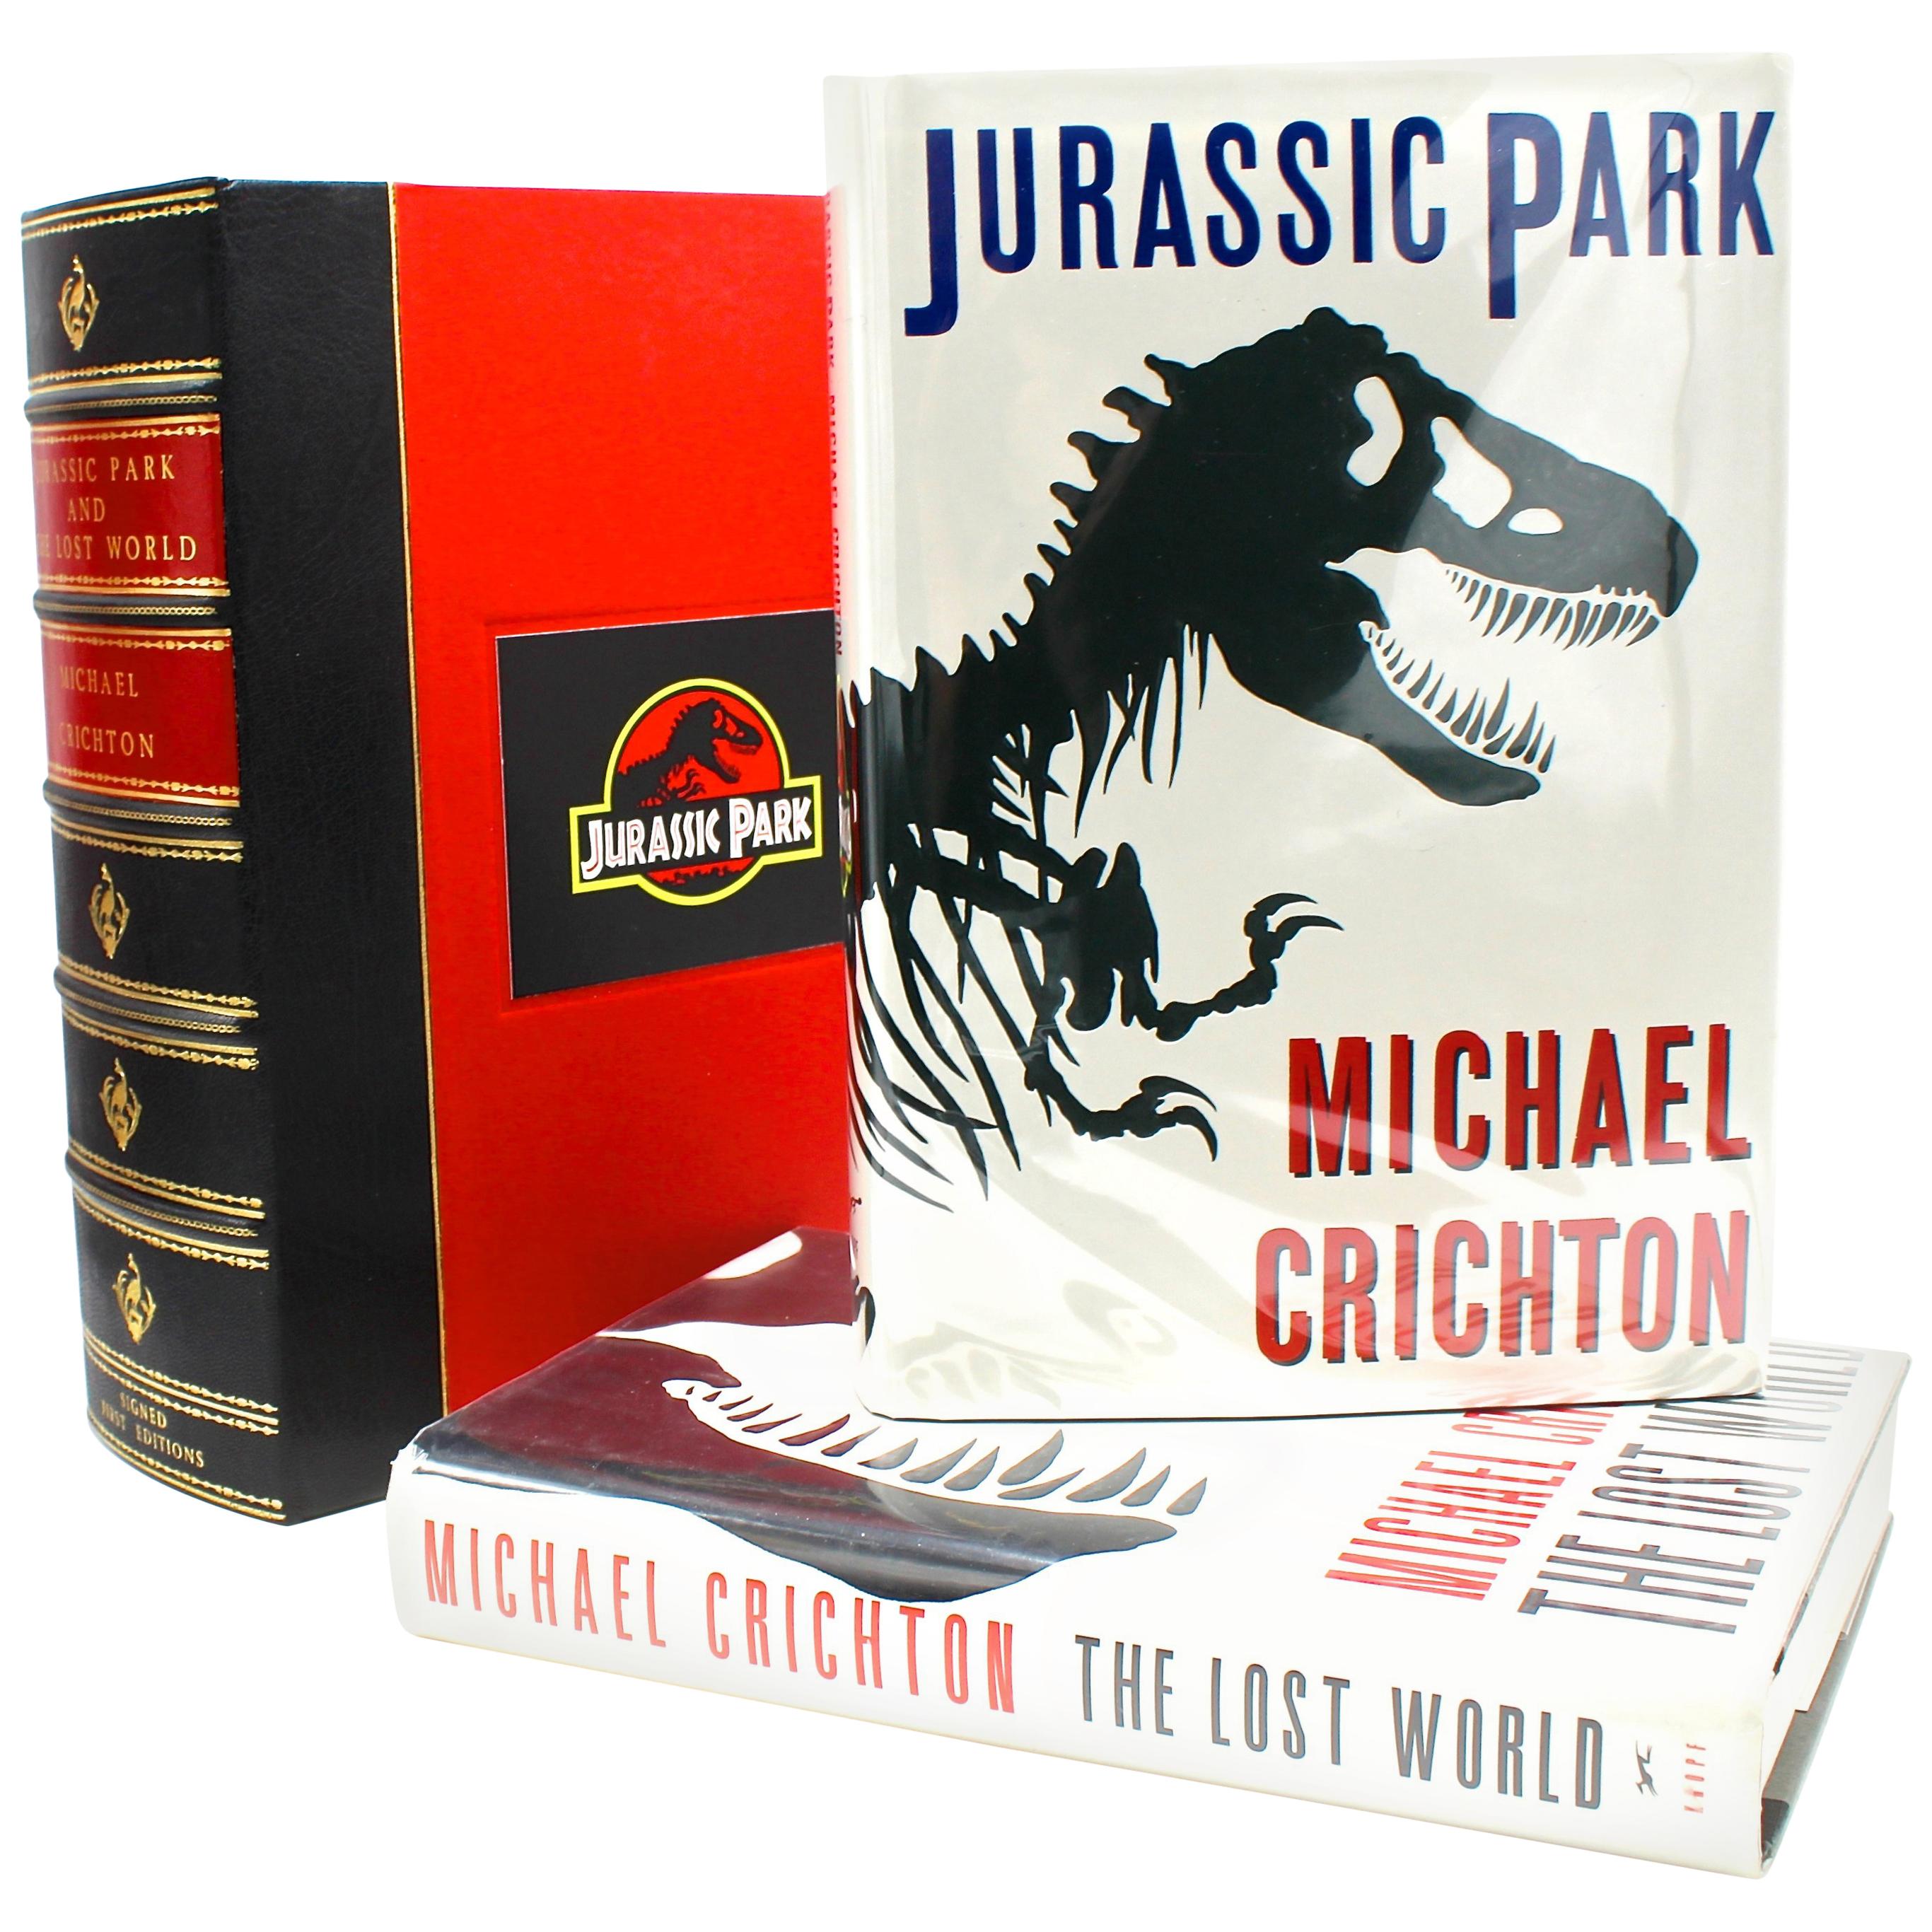 "Jurassic Park and The Lost World, " First Editions, Signed by Michael Chrichton